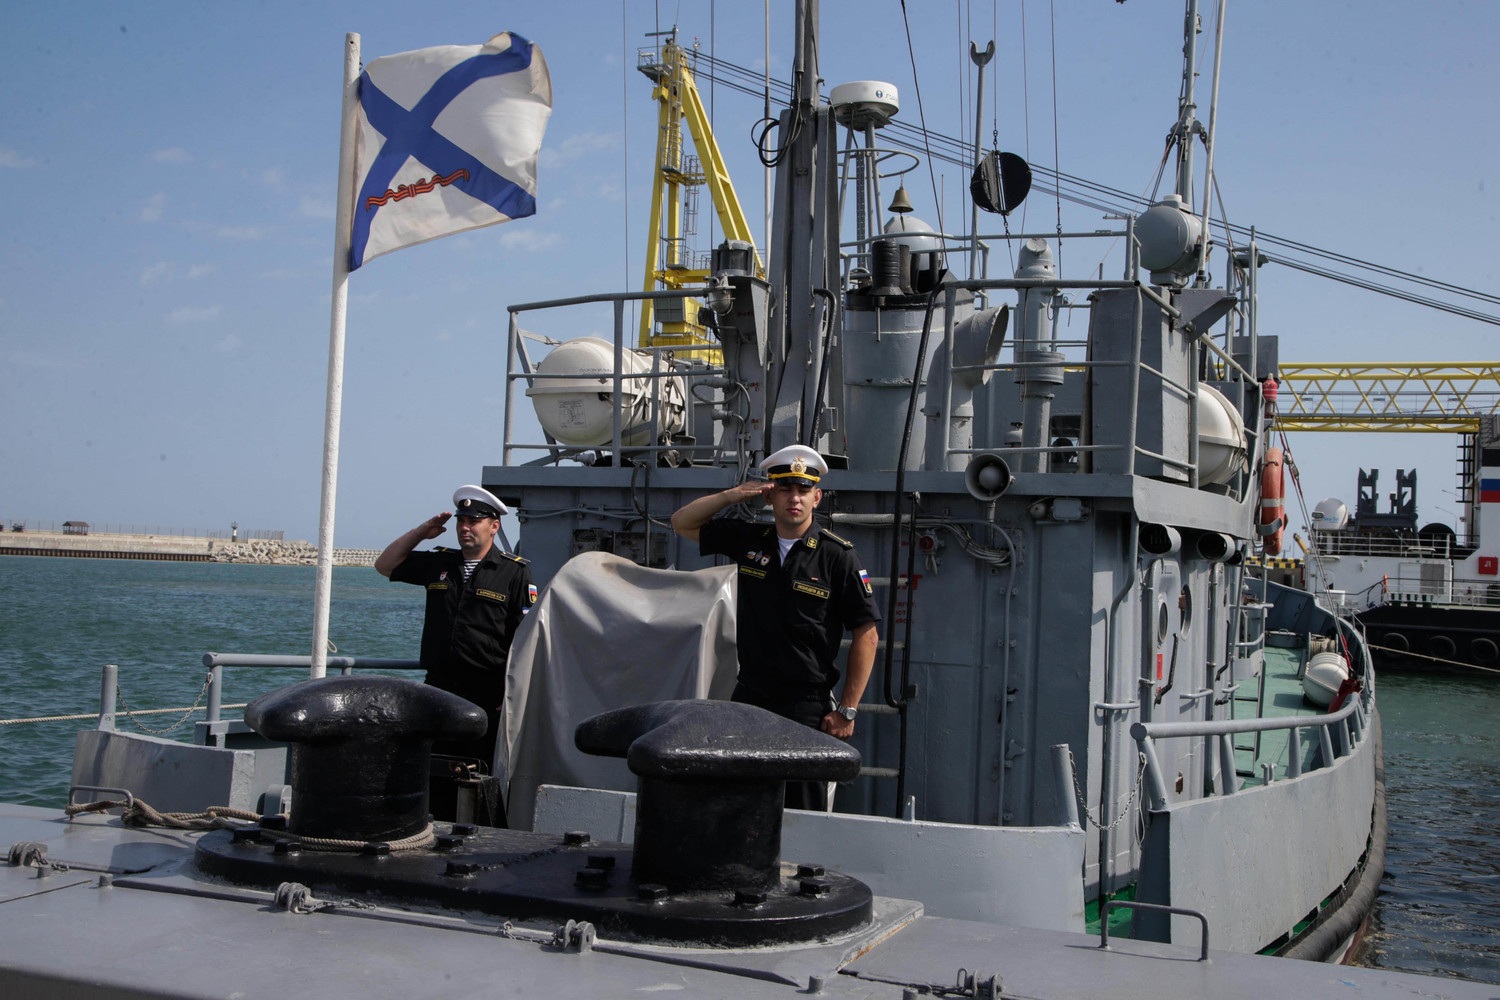 OS visited the flagship of the Caspian Flotilla, equipped with 